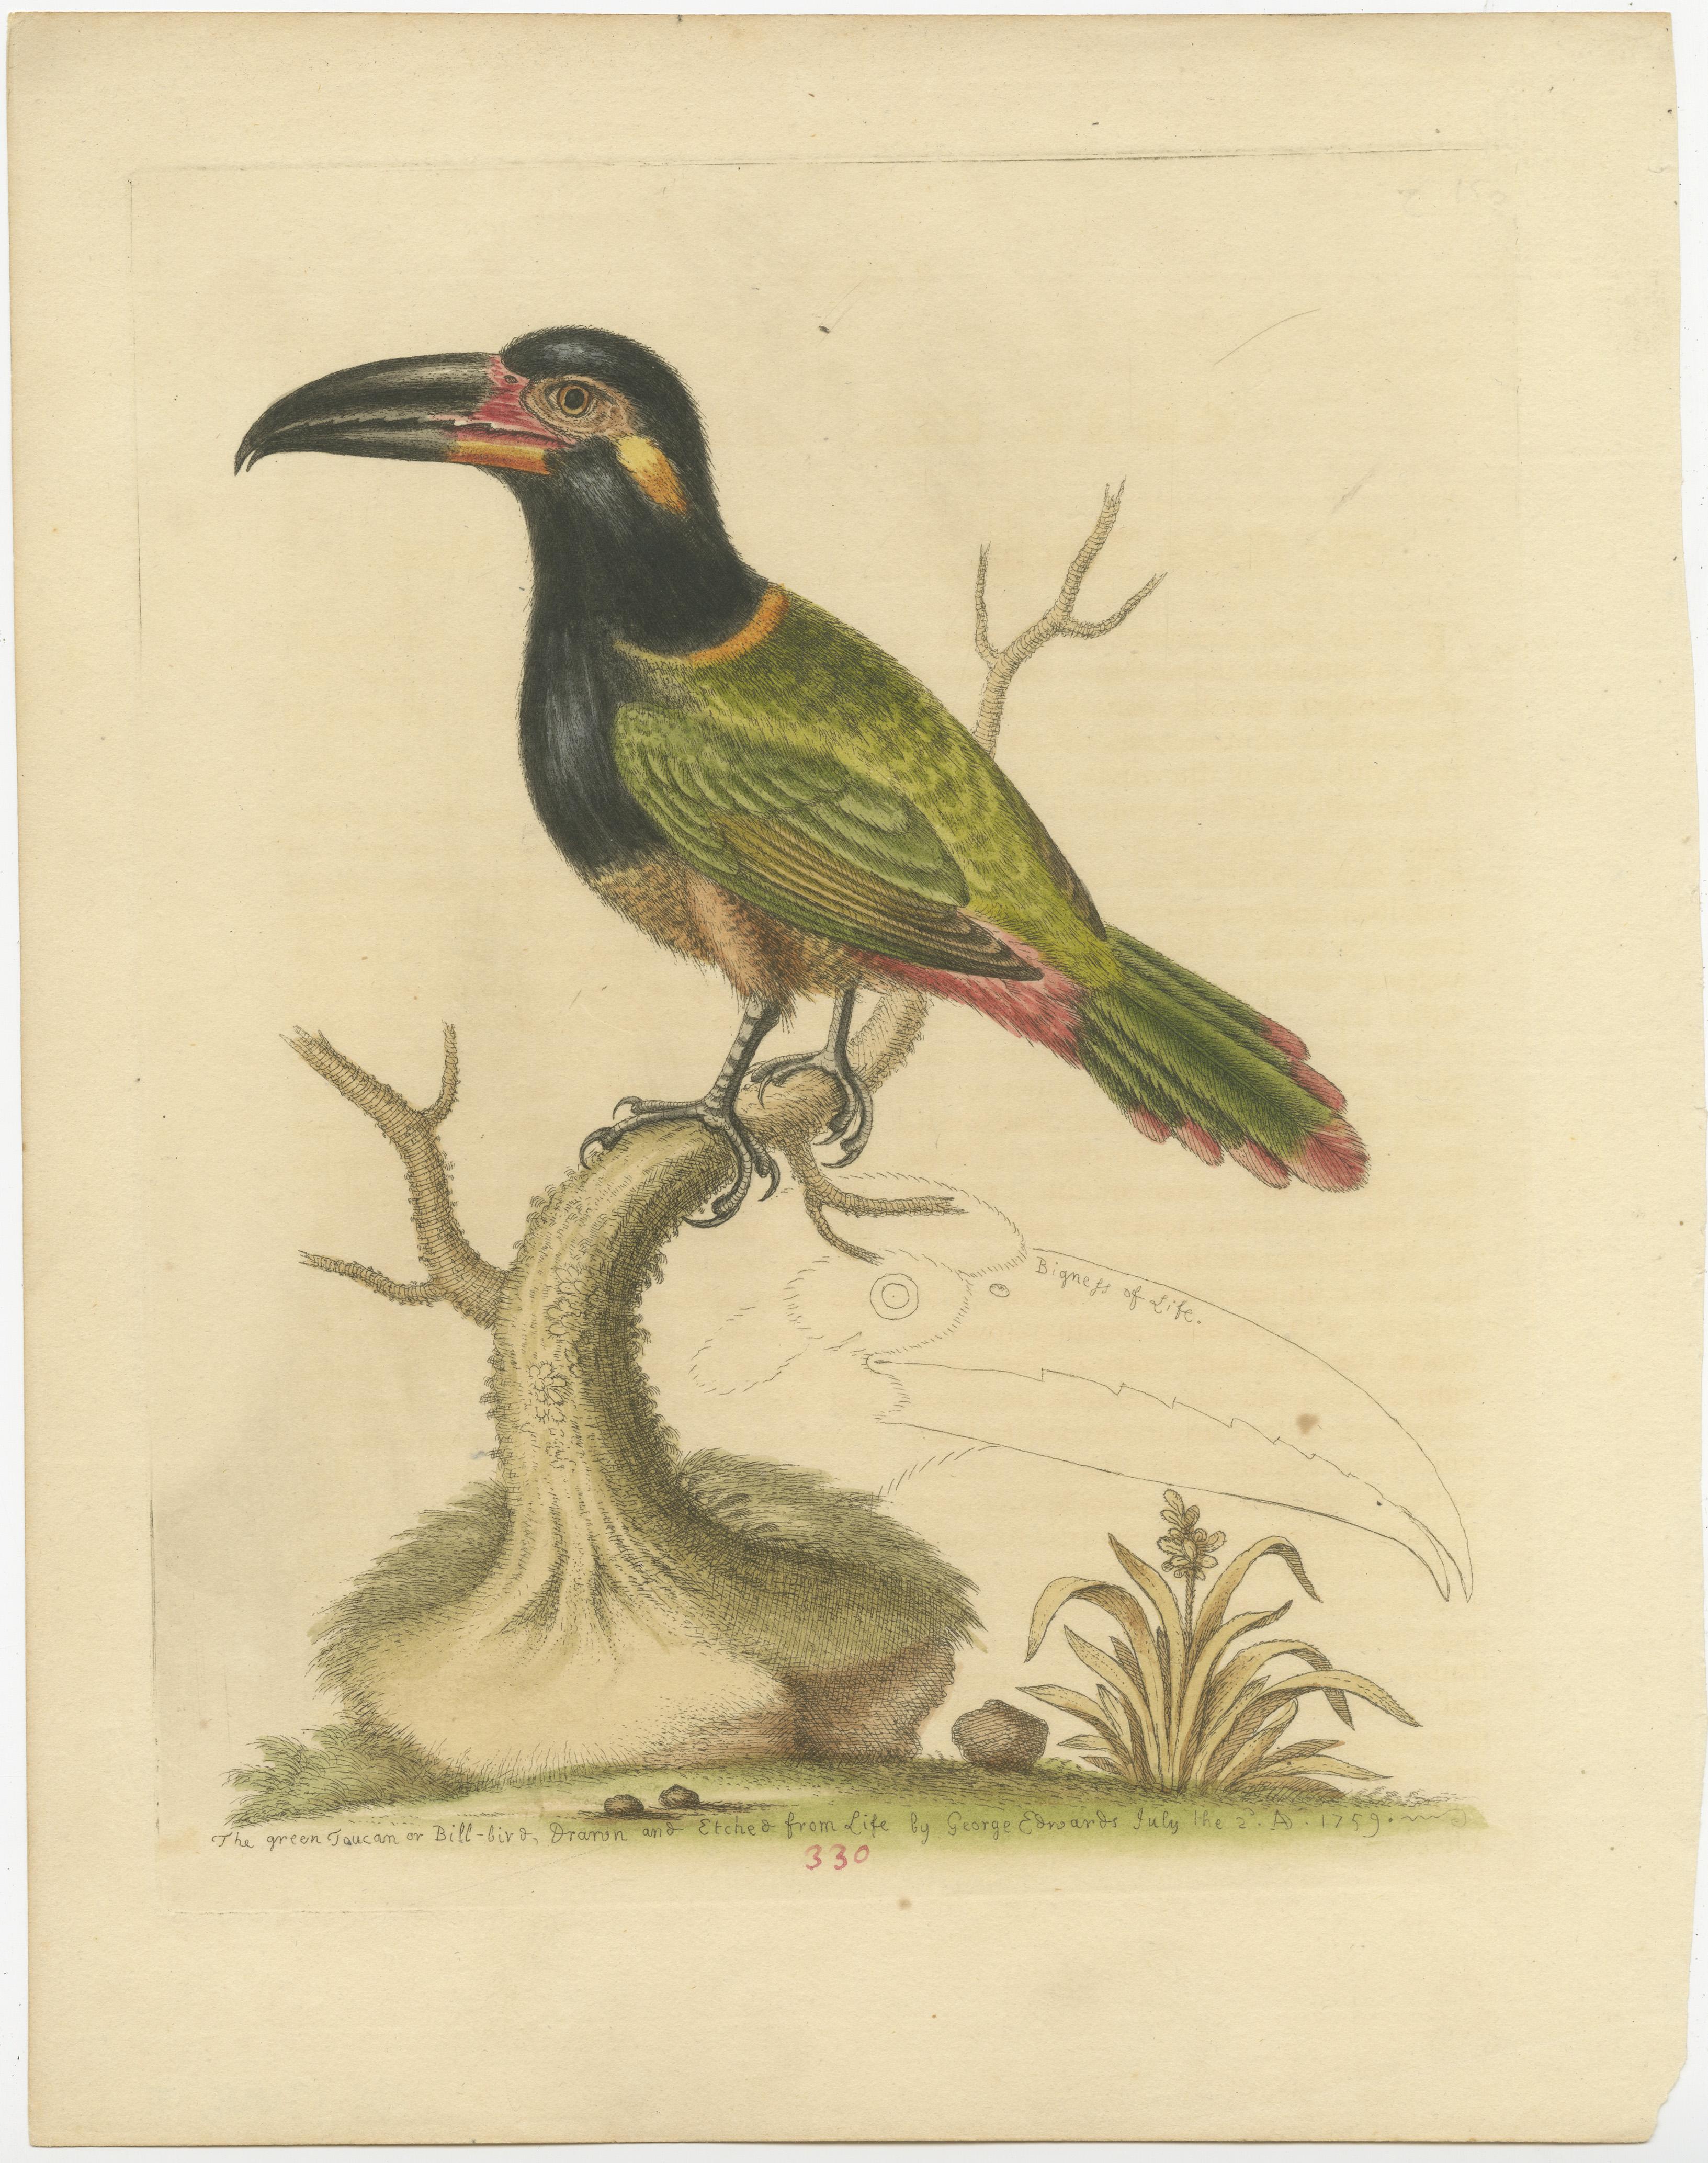 Original antique bird print of a green toucan. Published by George Edwards circa 1760. 

George Edwards FRS (3 April 1694 – 23 July 1773) was an English naturalist and ornithologist, known as the 